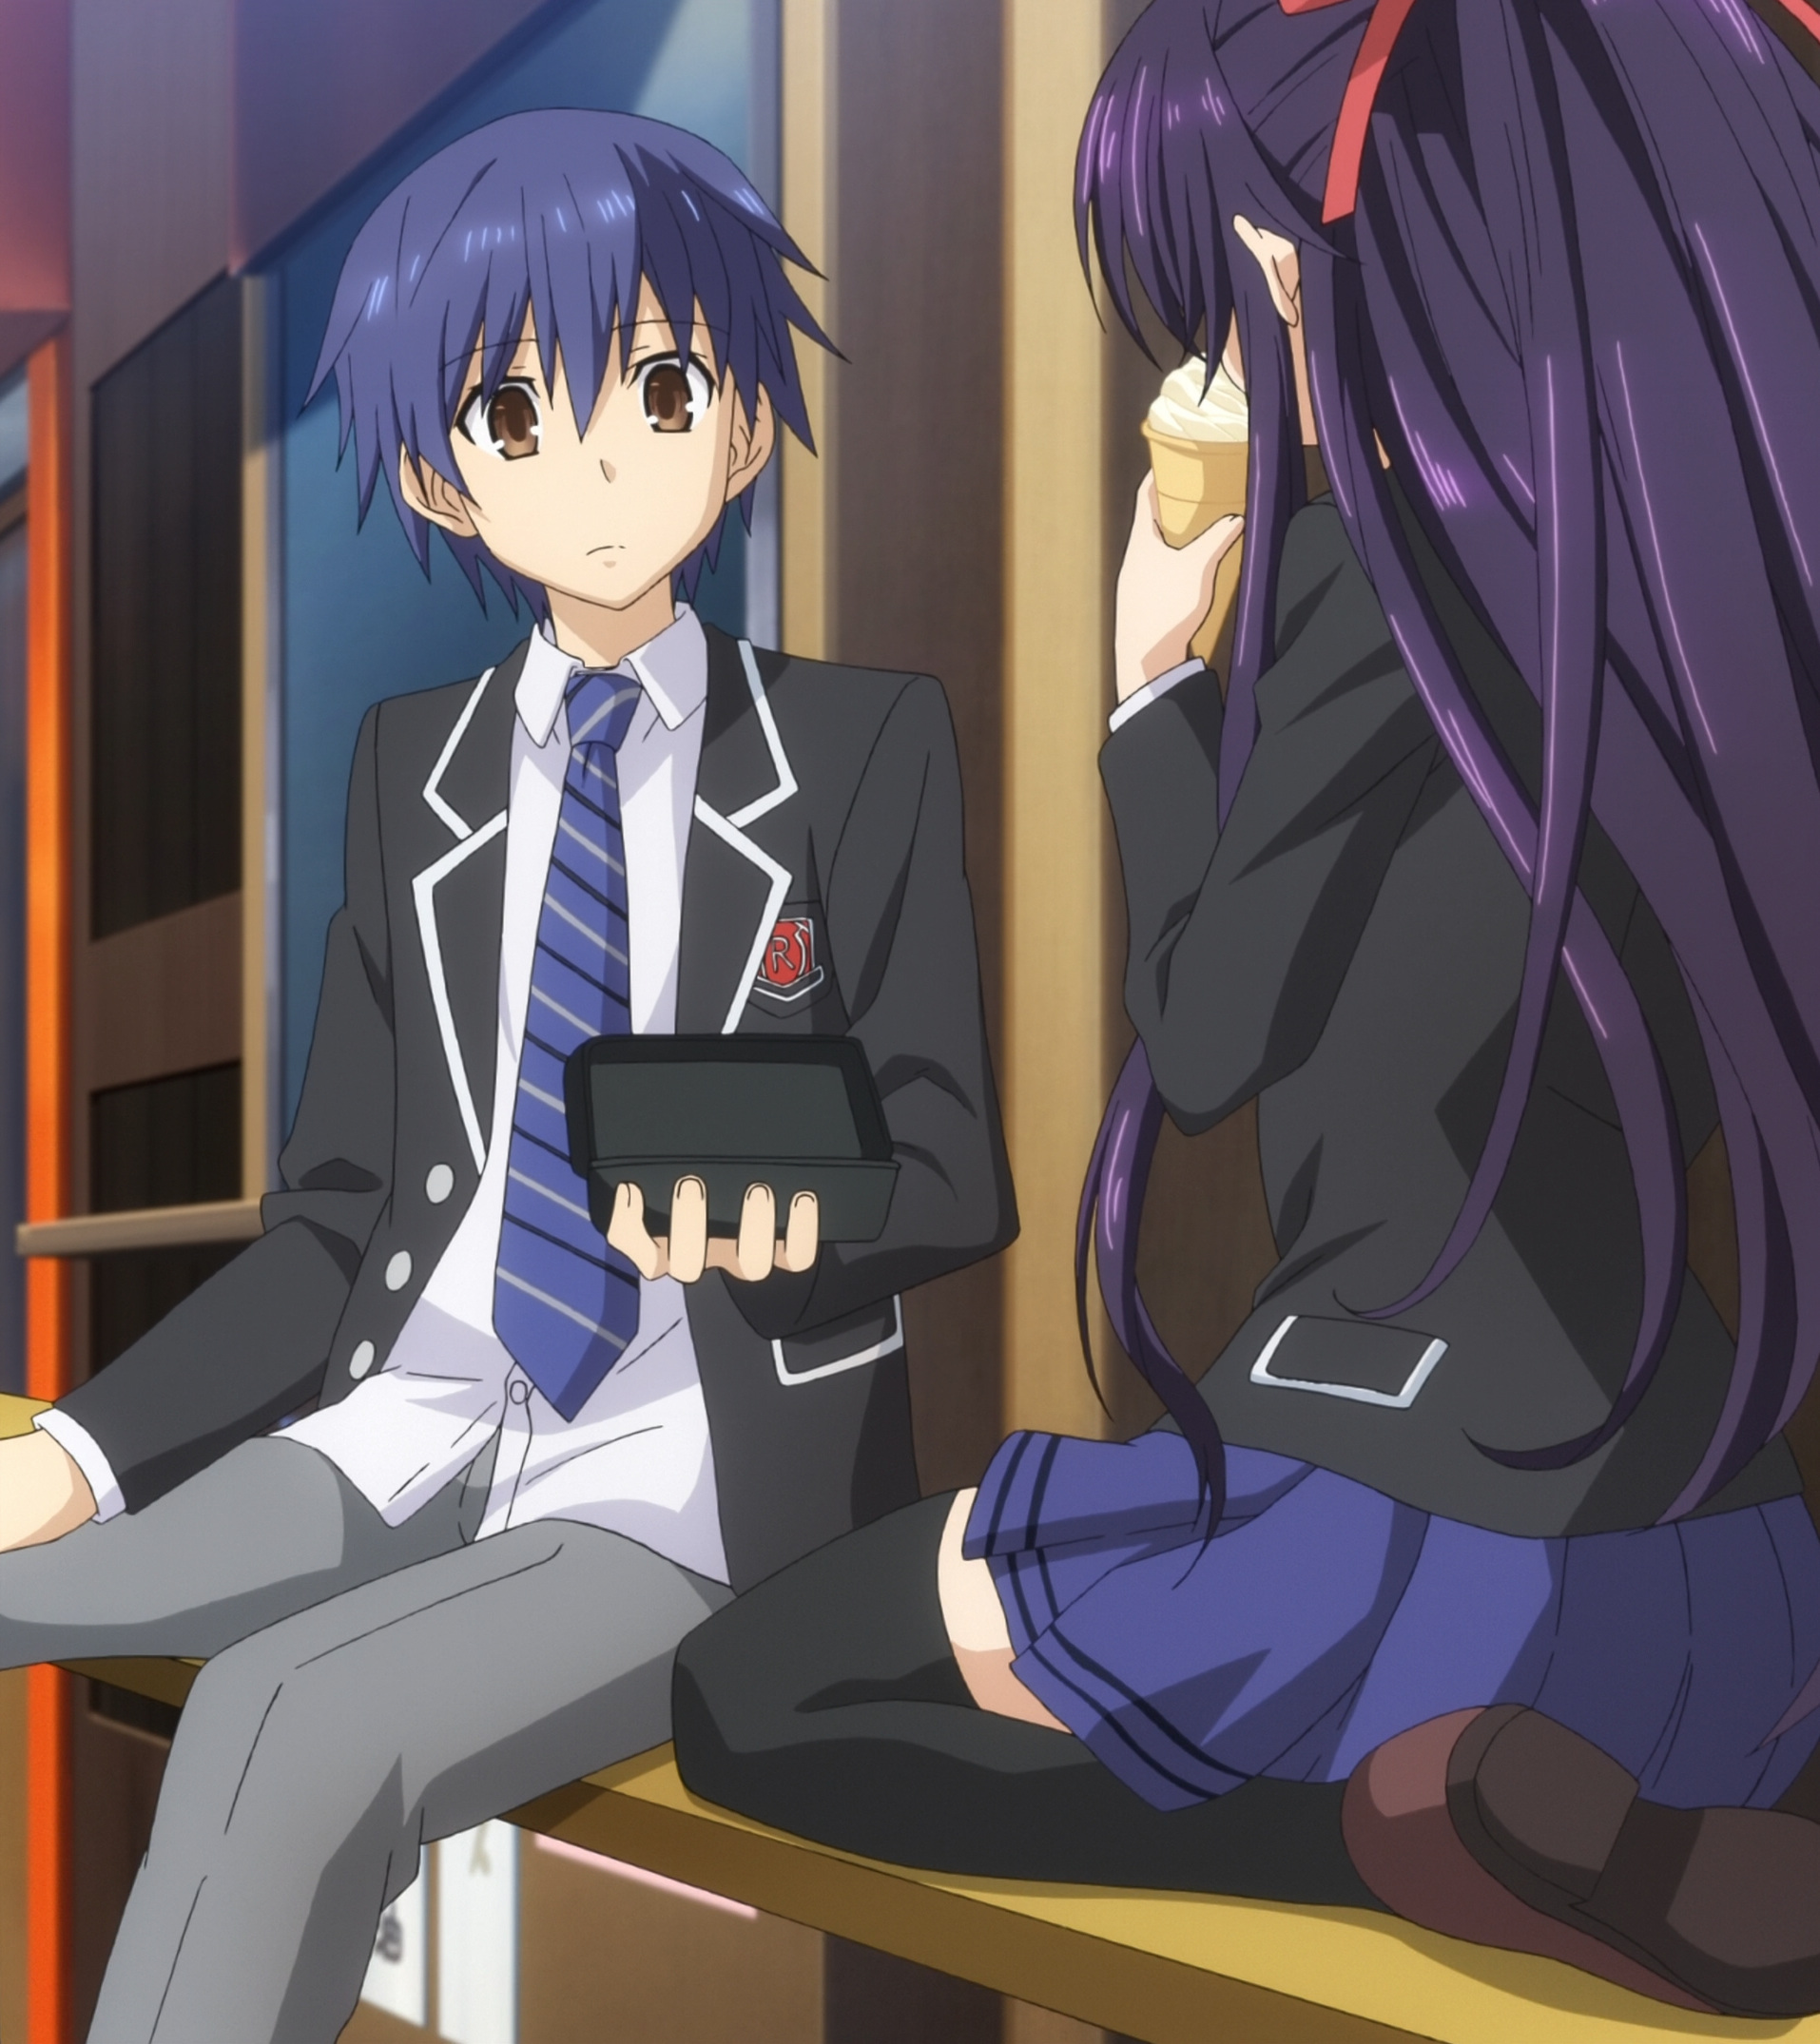 First, shido’s "second chance" will be explained later. 